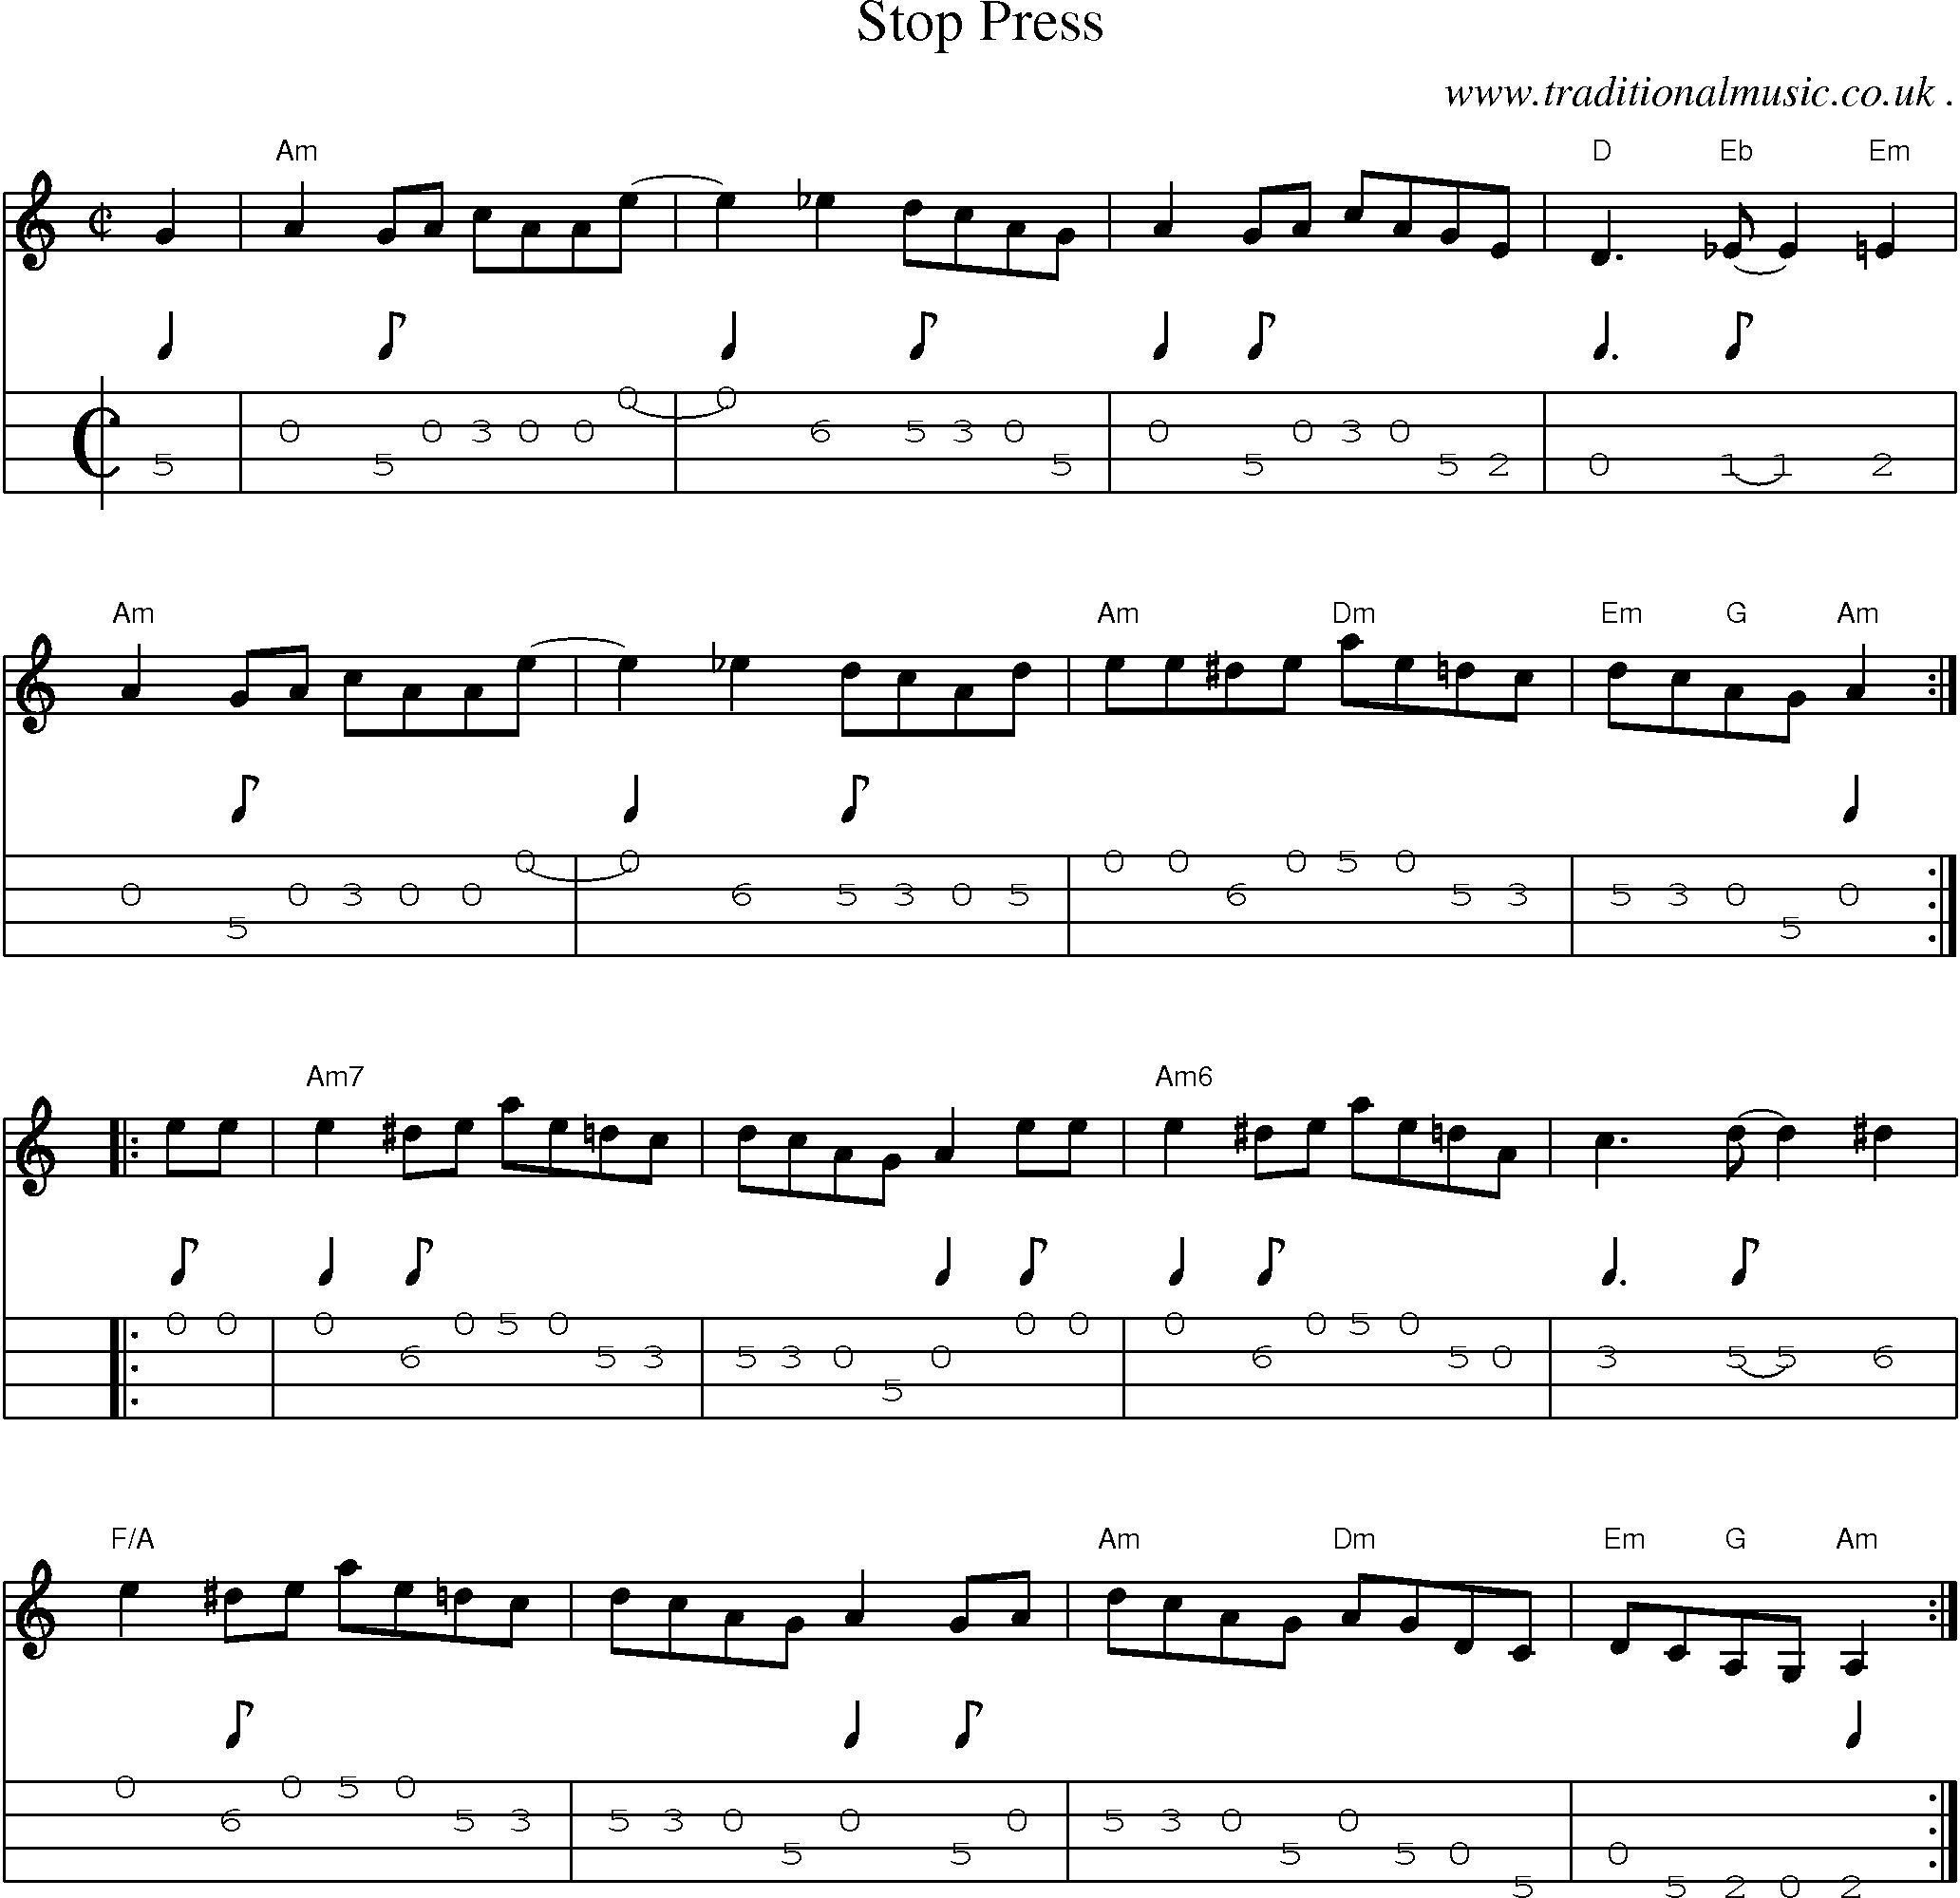 Music Score and Guitar Tabs for Stop Press